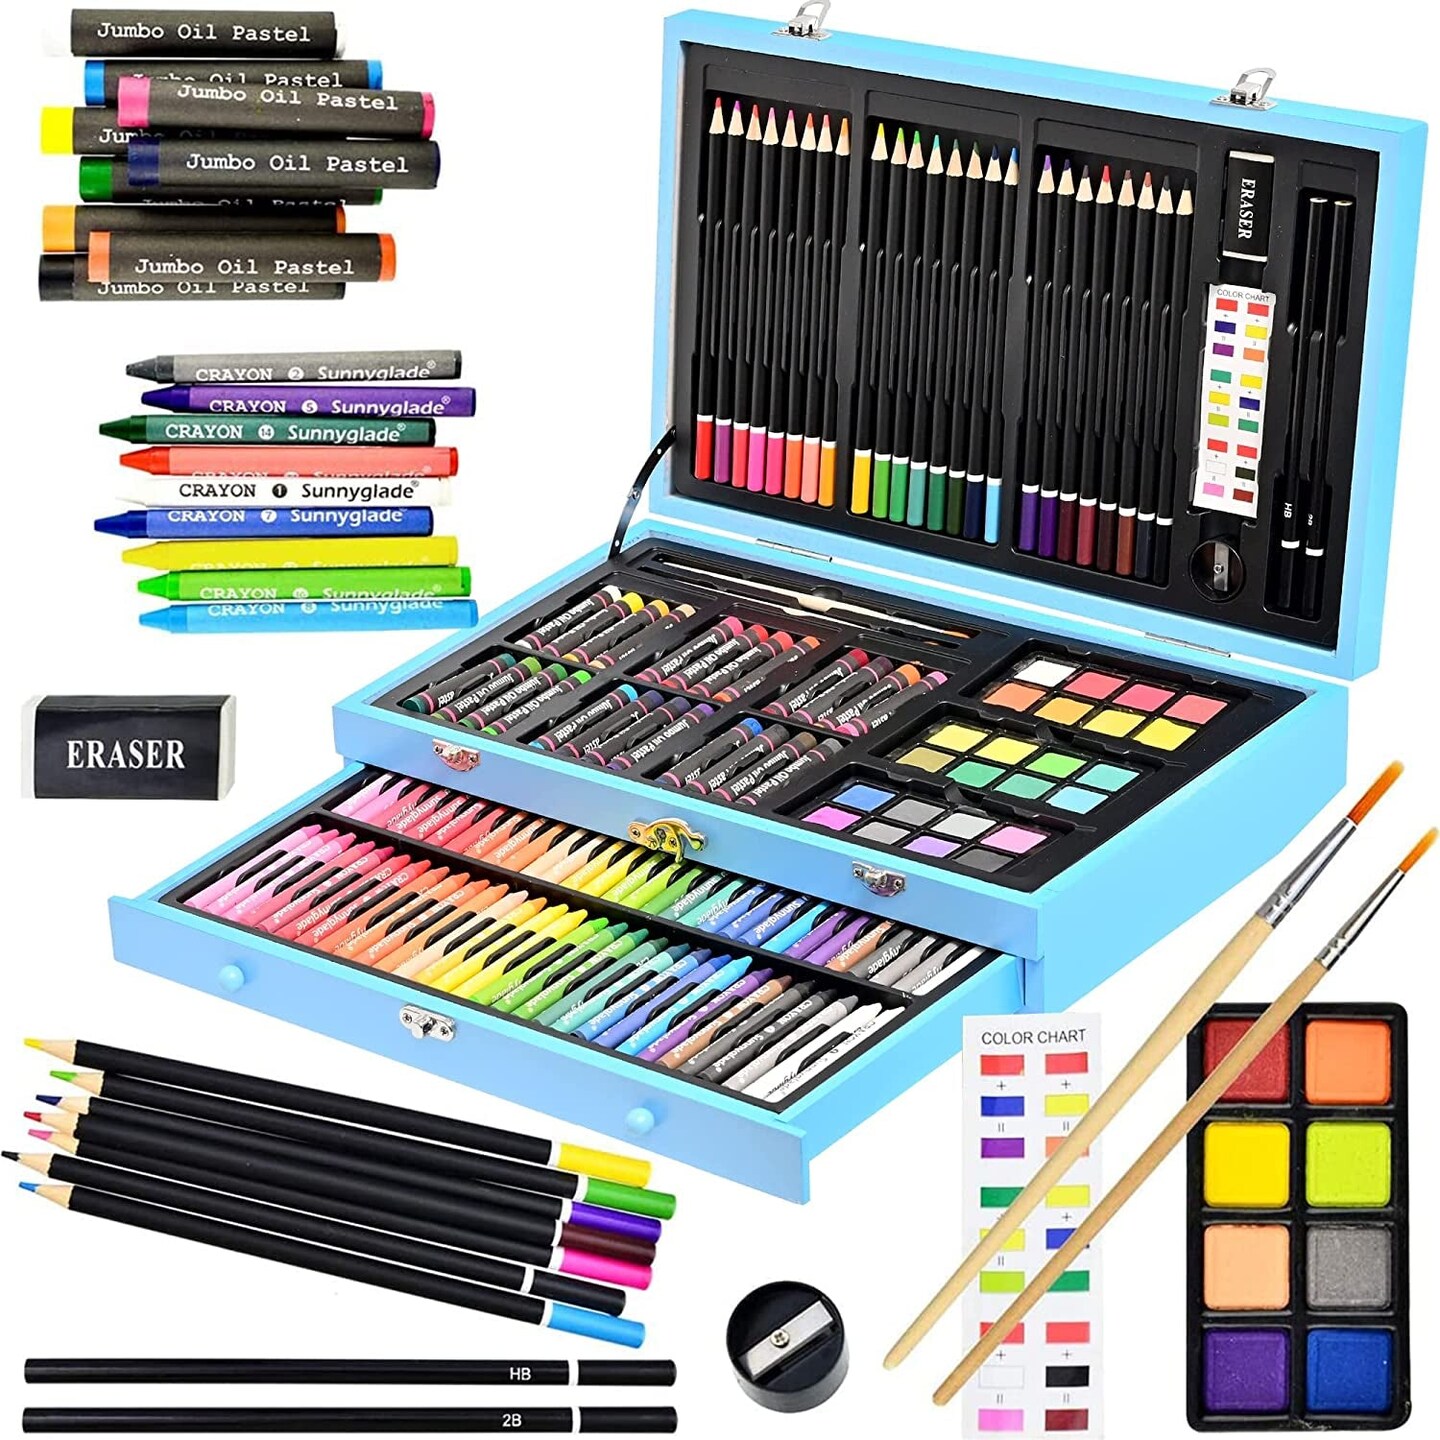 145 Piece Art Set, Deluxe Mega Aluminum Box & Drawing Kit With Colored  Pencils, Markers, Watercolor Paints, Crayons, Hb Pencils, Watercolor Cake,  Brus